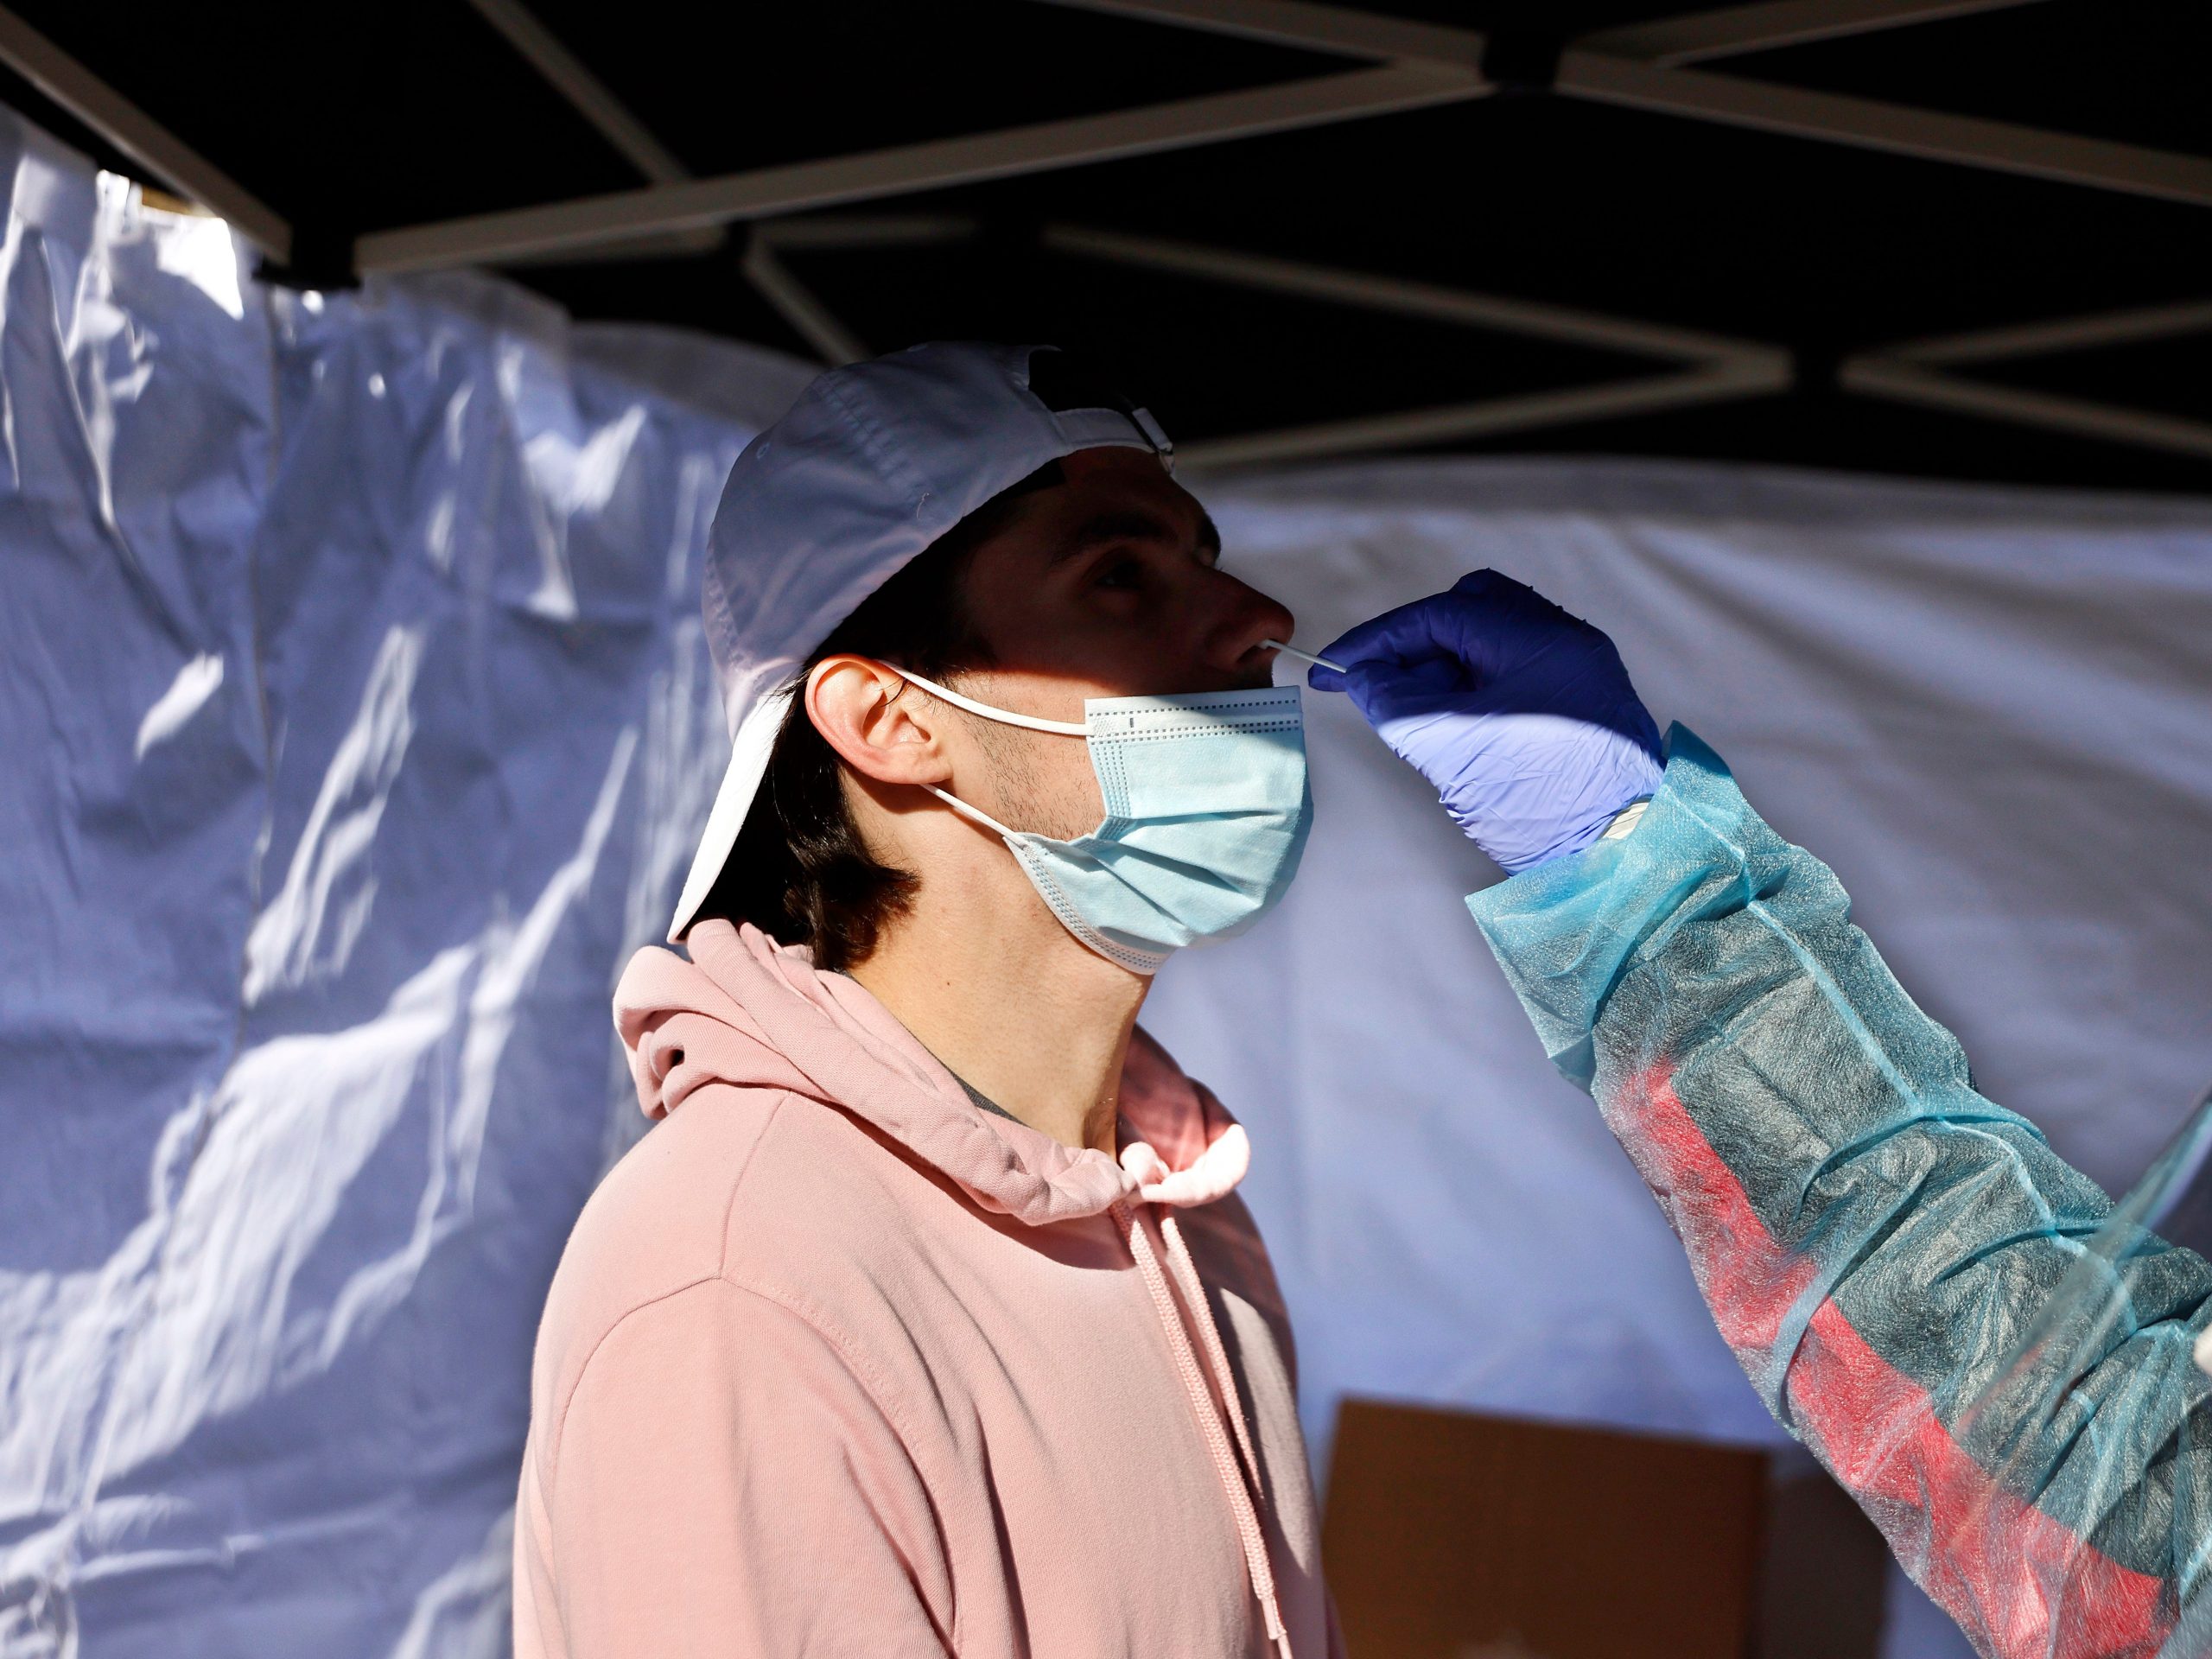 A person wearing white backwards cap and mask is tested for COVID-19.